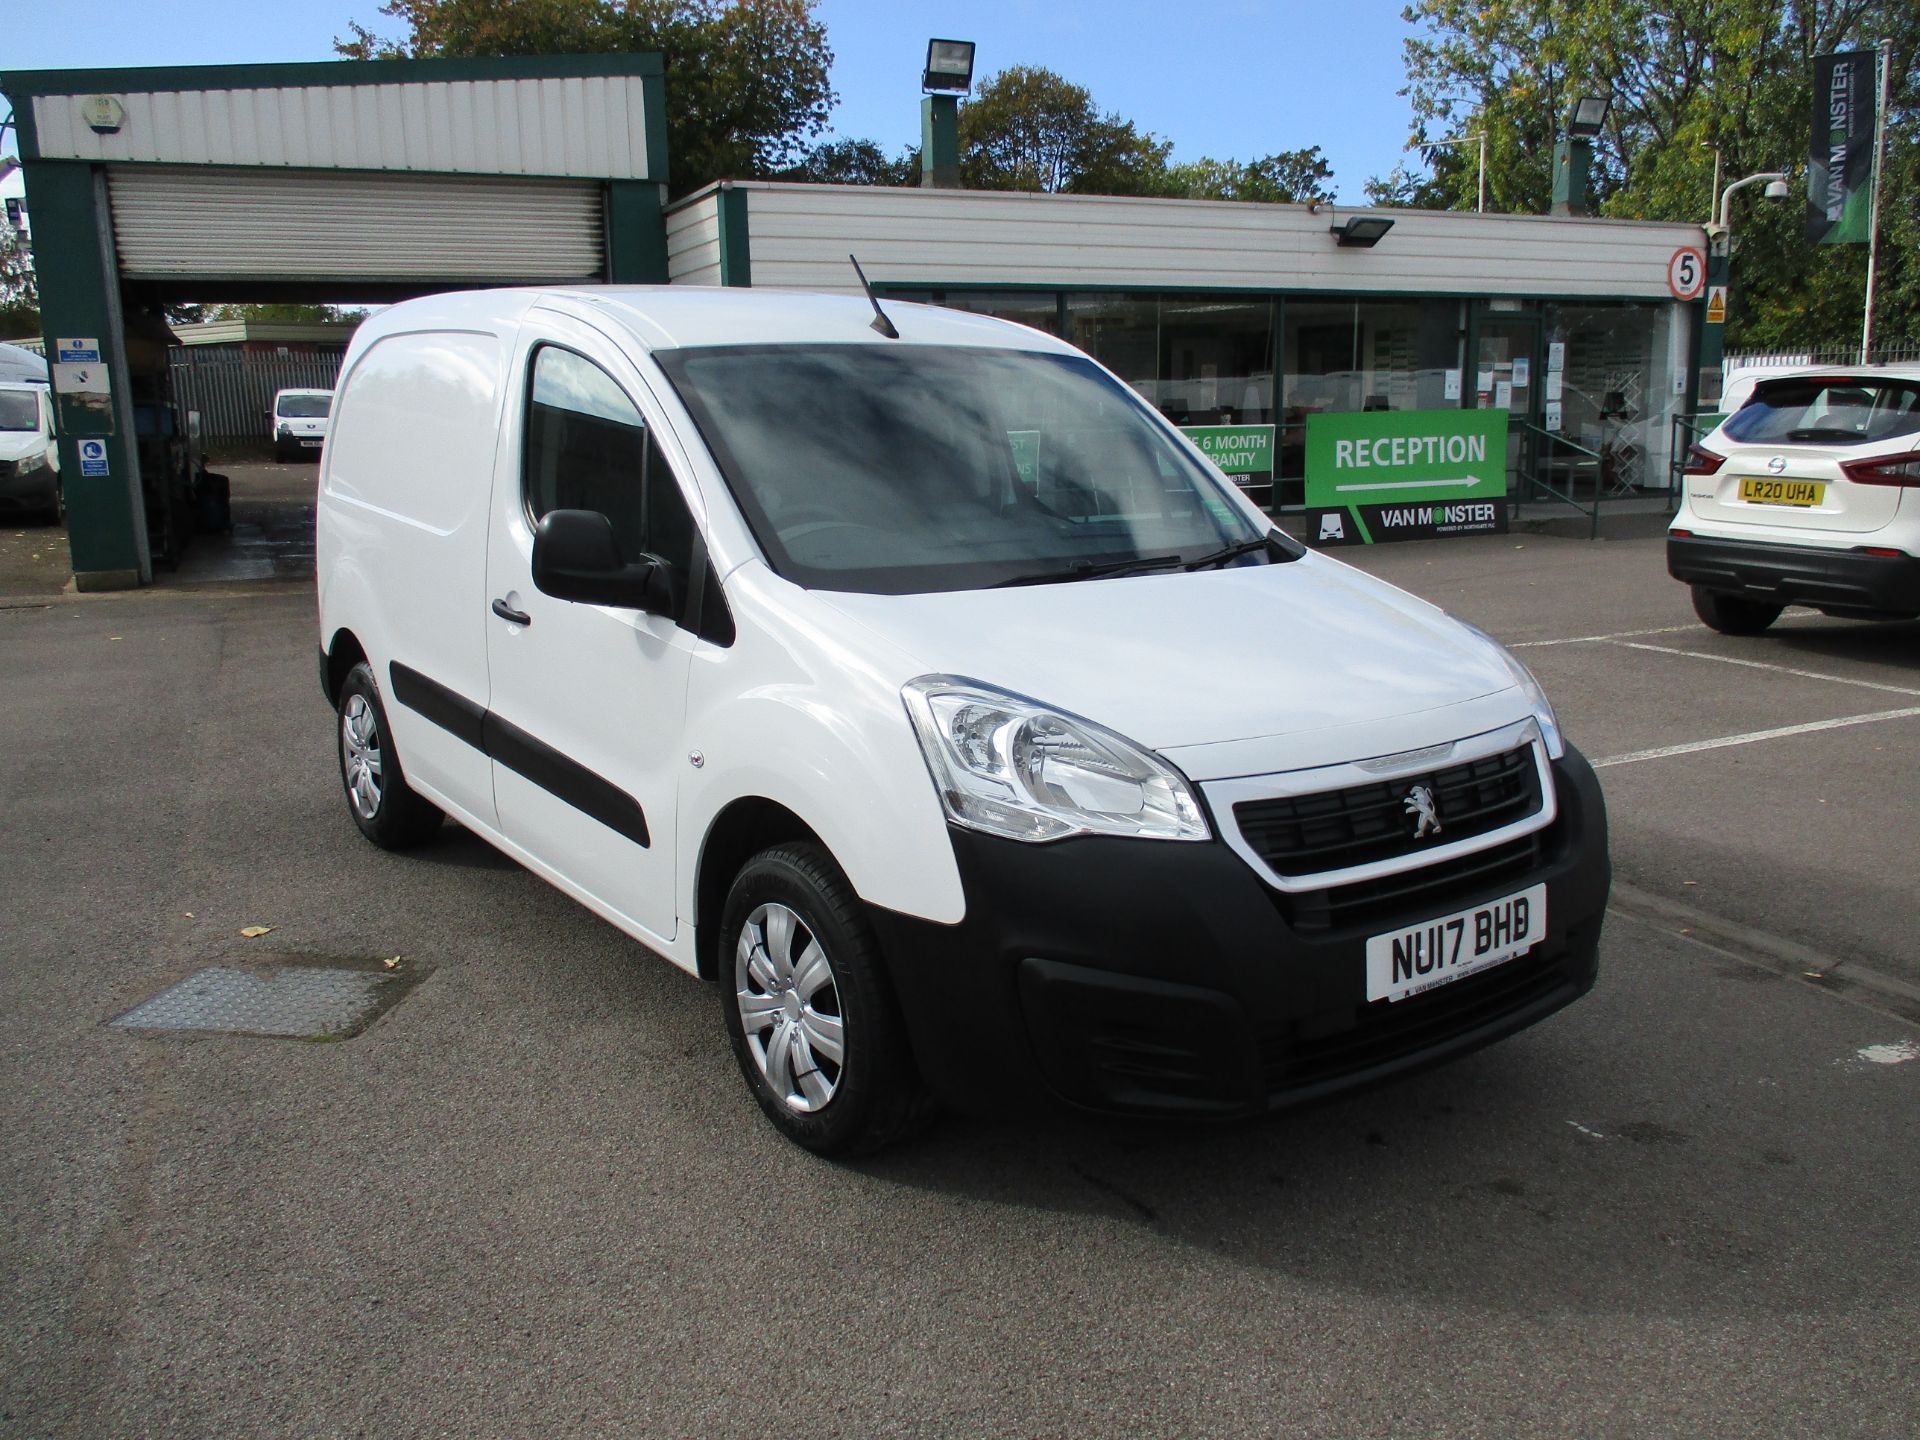 used vans leicester